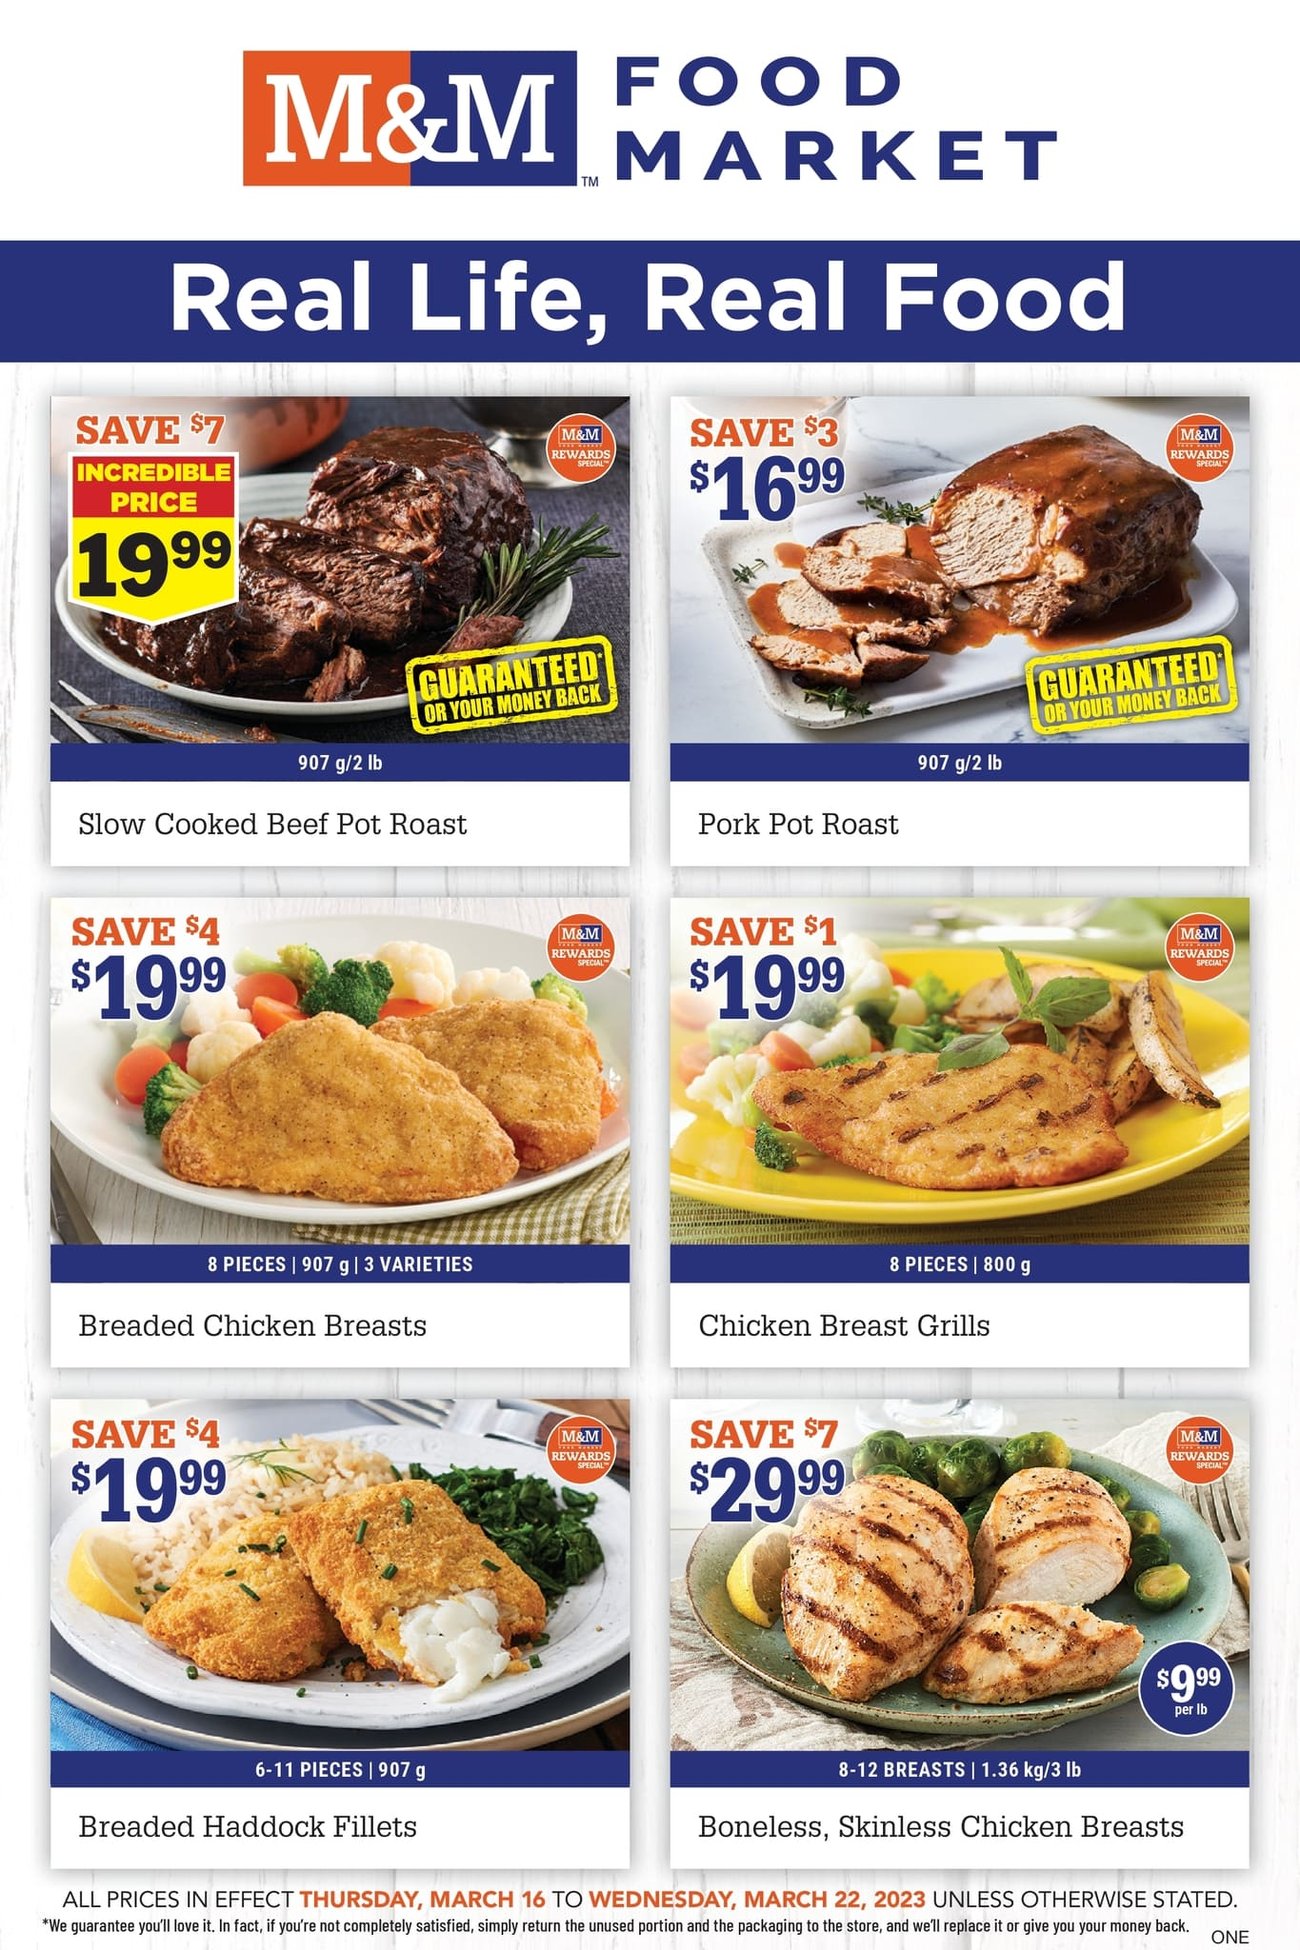 M&M Food Market - Weekly Flyer Specials - Page 1